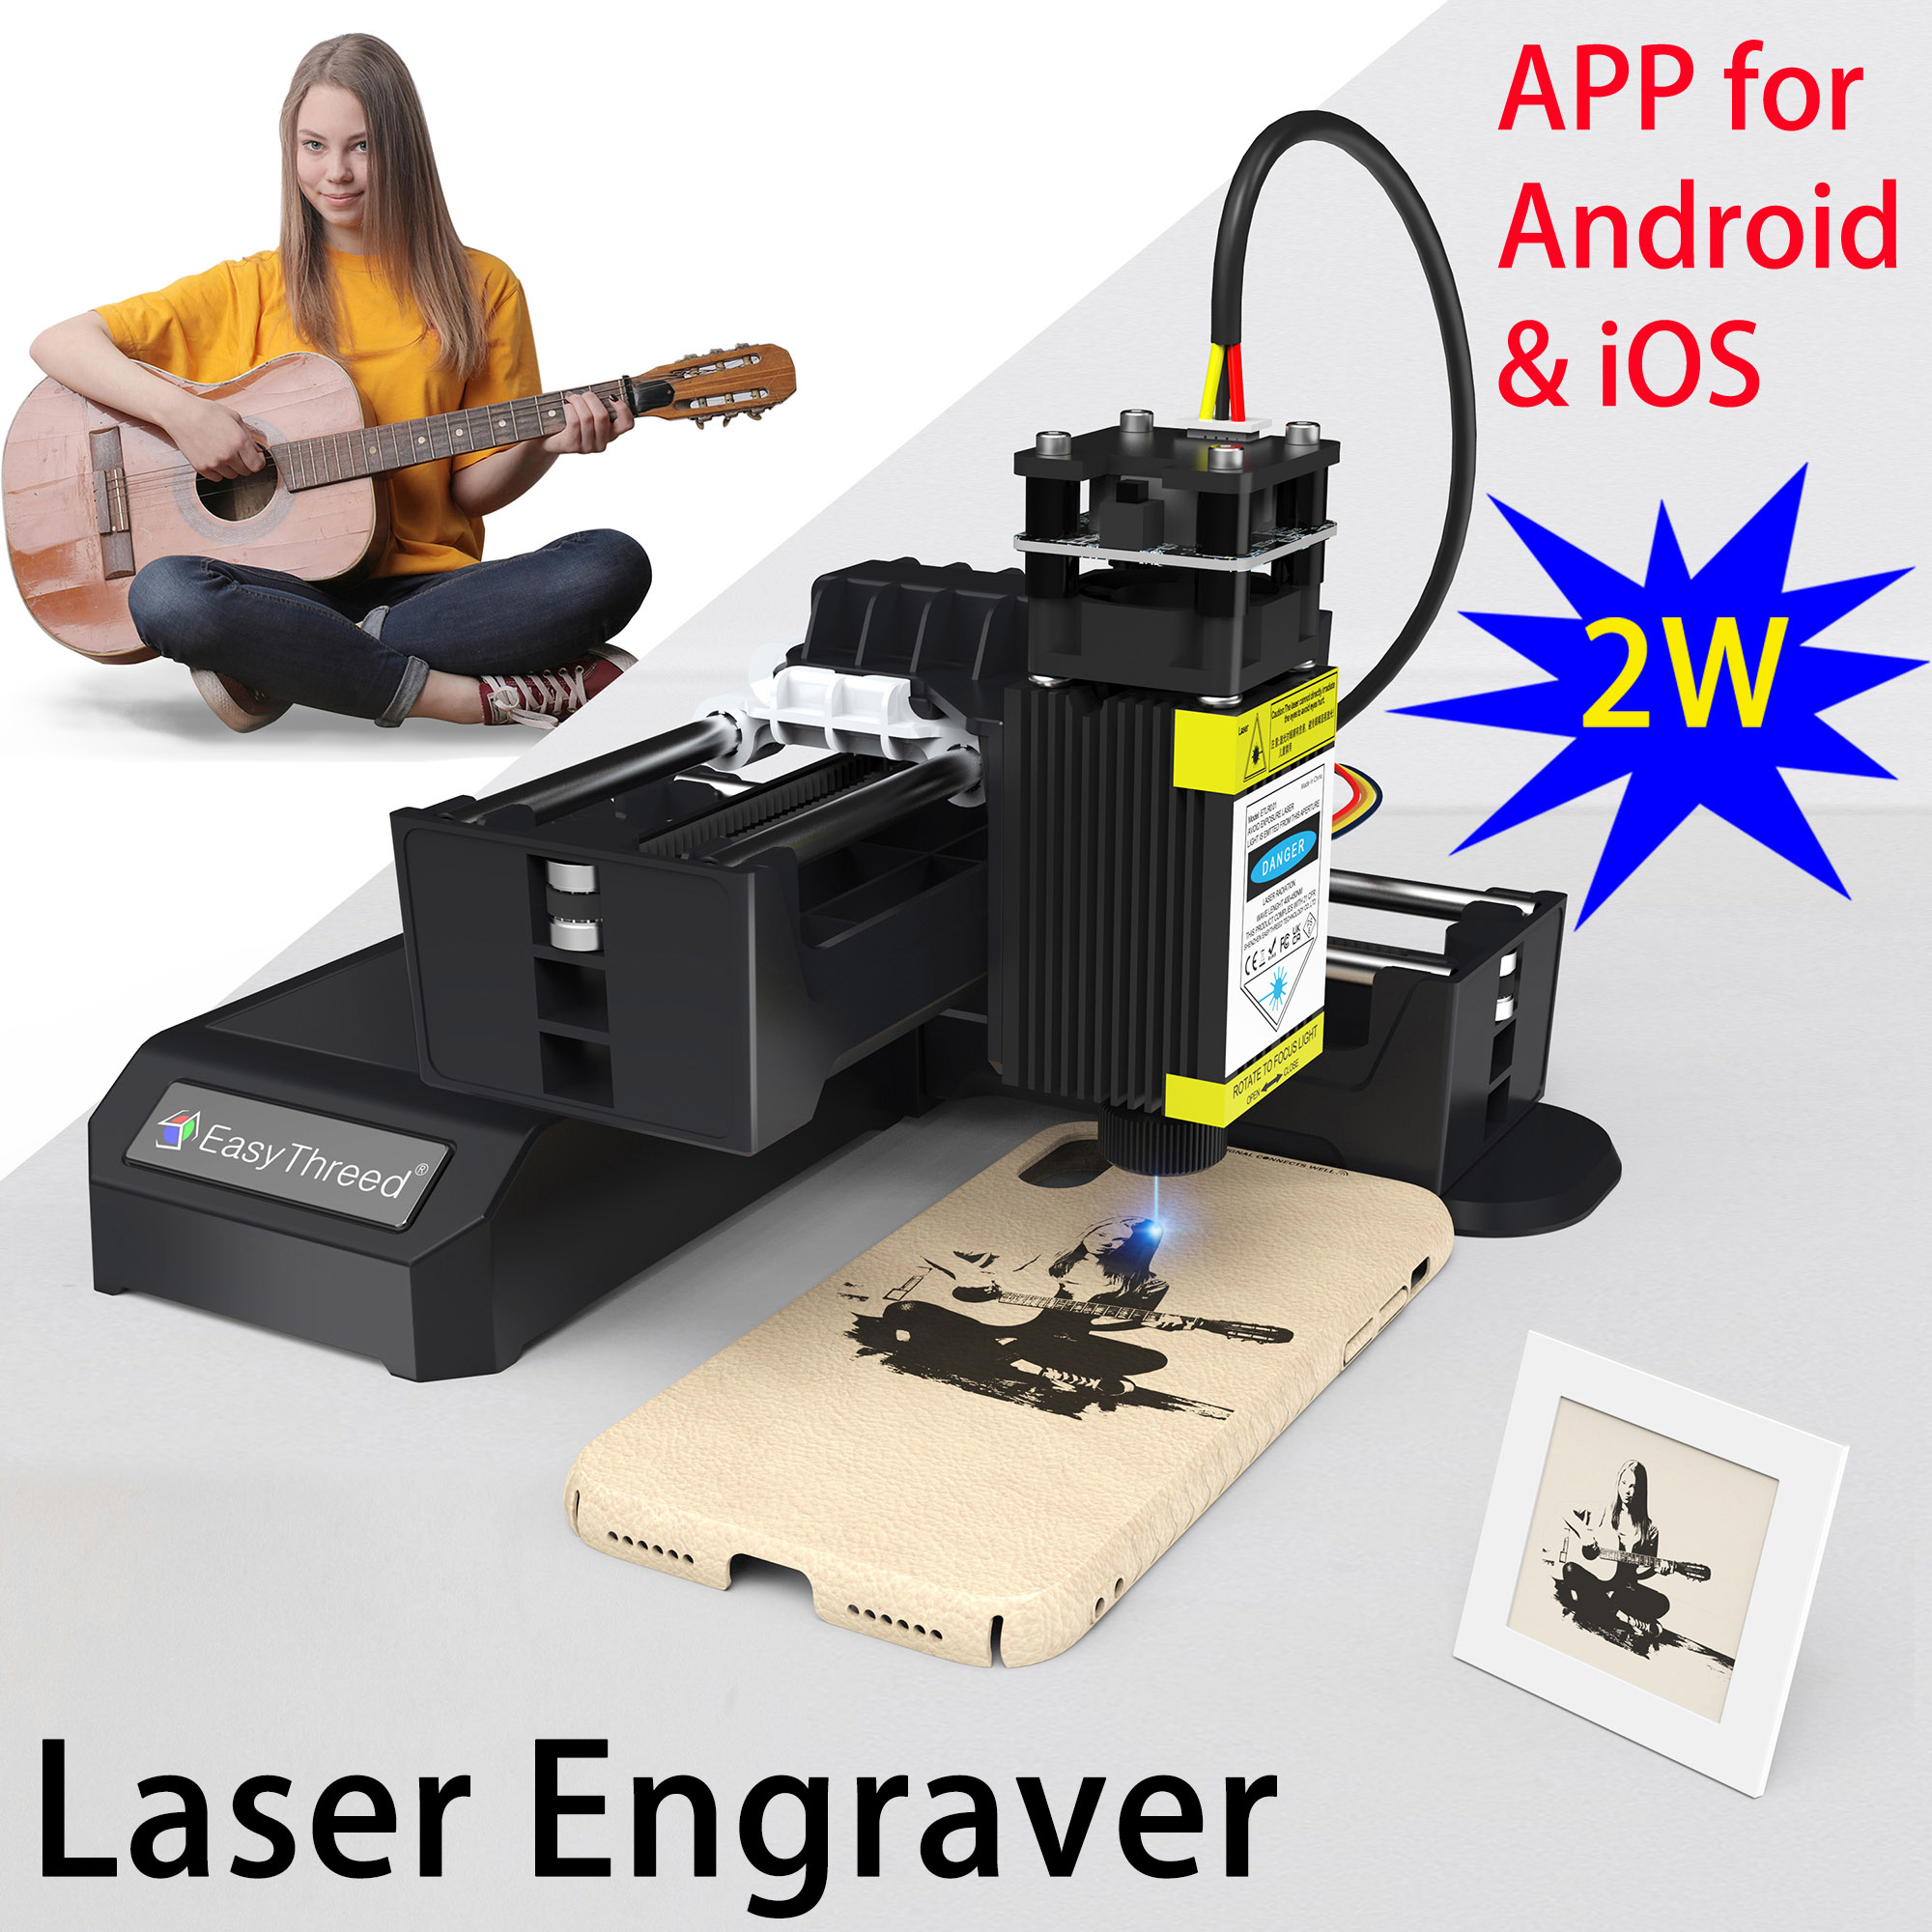 EasyThreed Laser Engraver 2W Entry Level Beginners Mobile APP Bluetooth connectivity Creative DIY Versatile Tool for Wood Leather Plastic Rubber Engraving Area 100x100mm 3.94x3.94inch